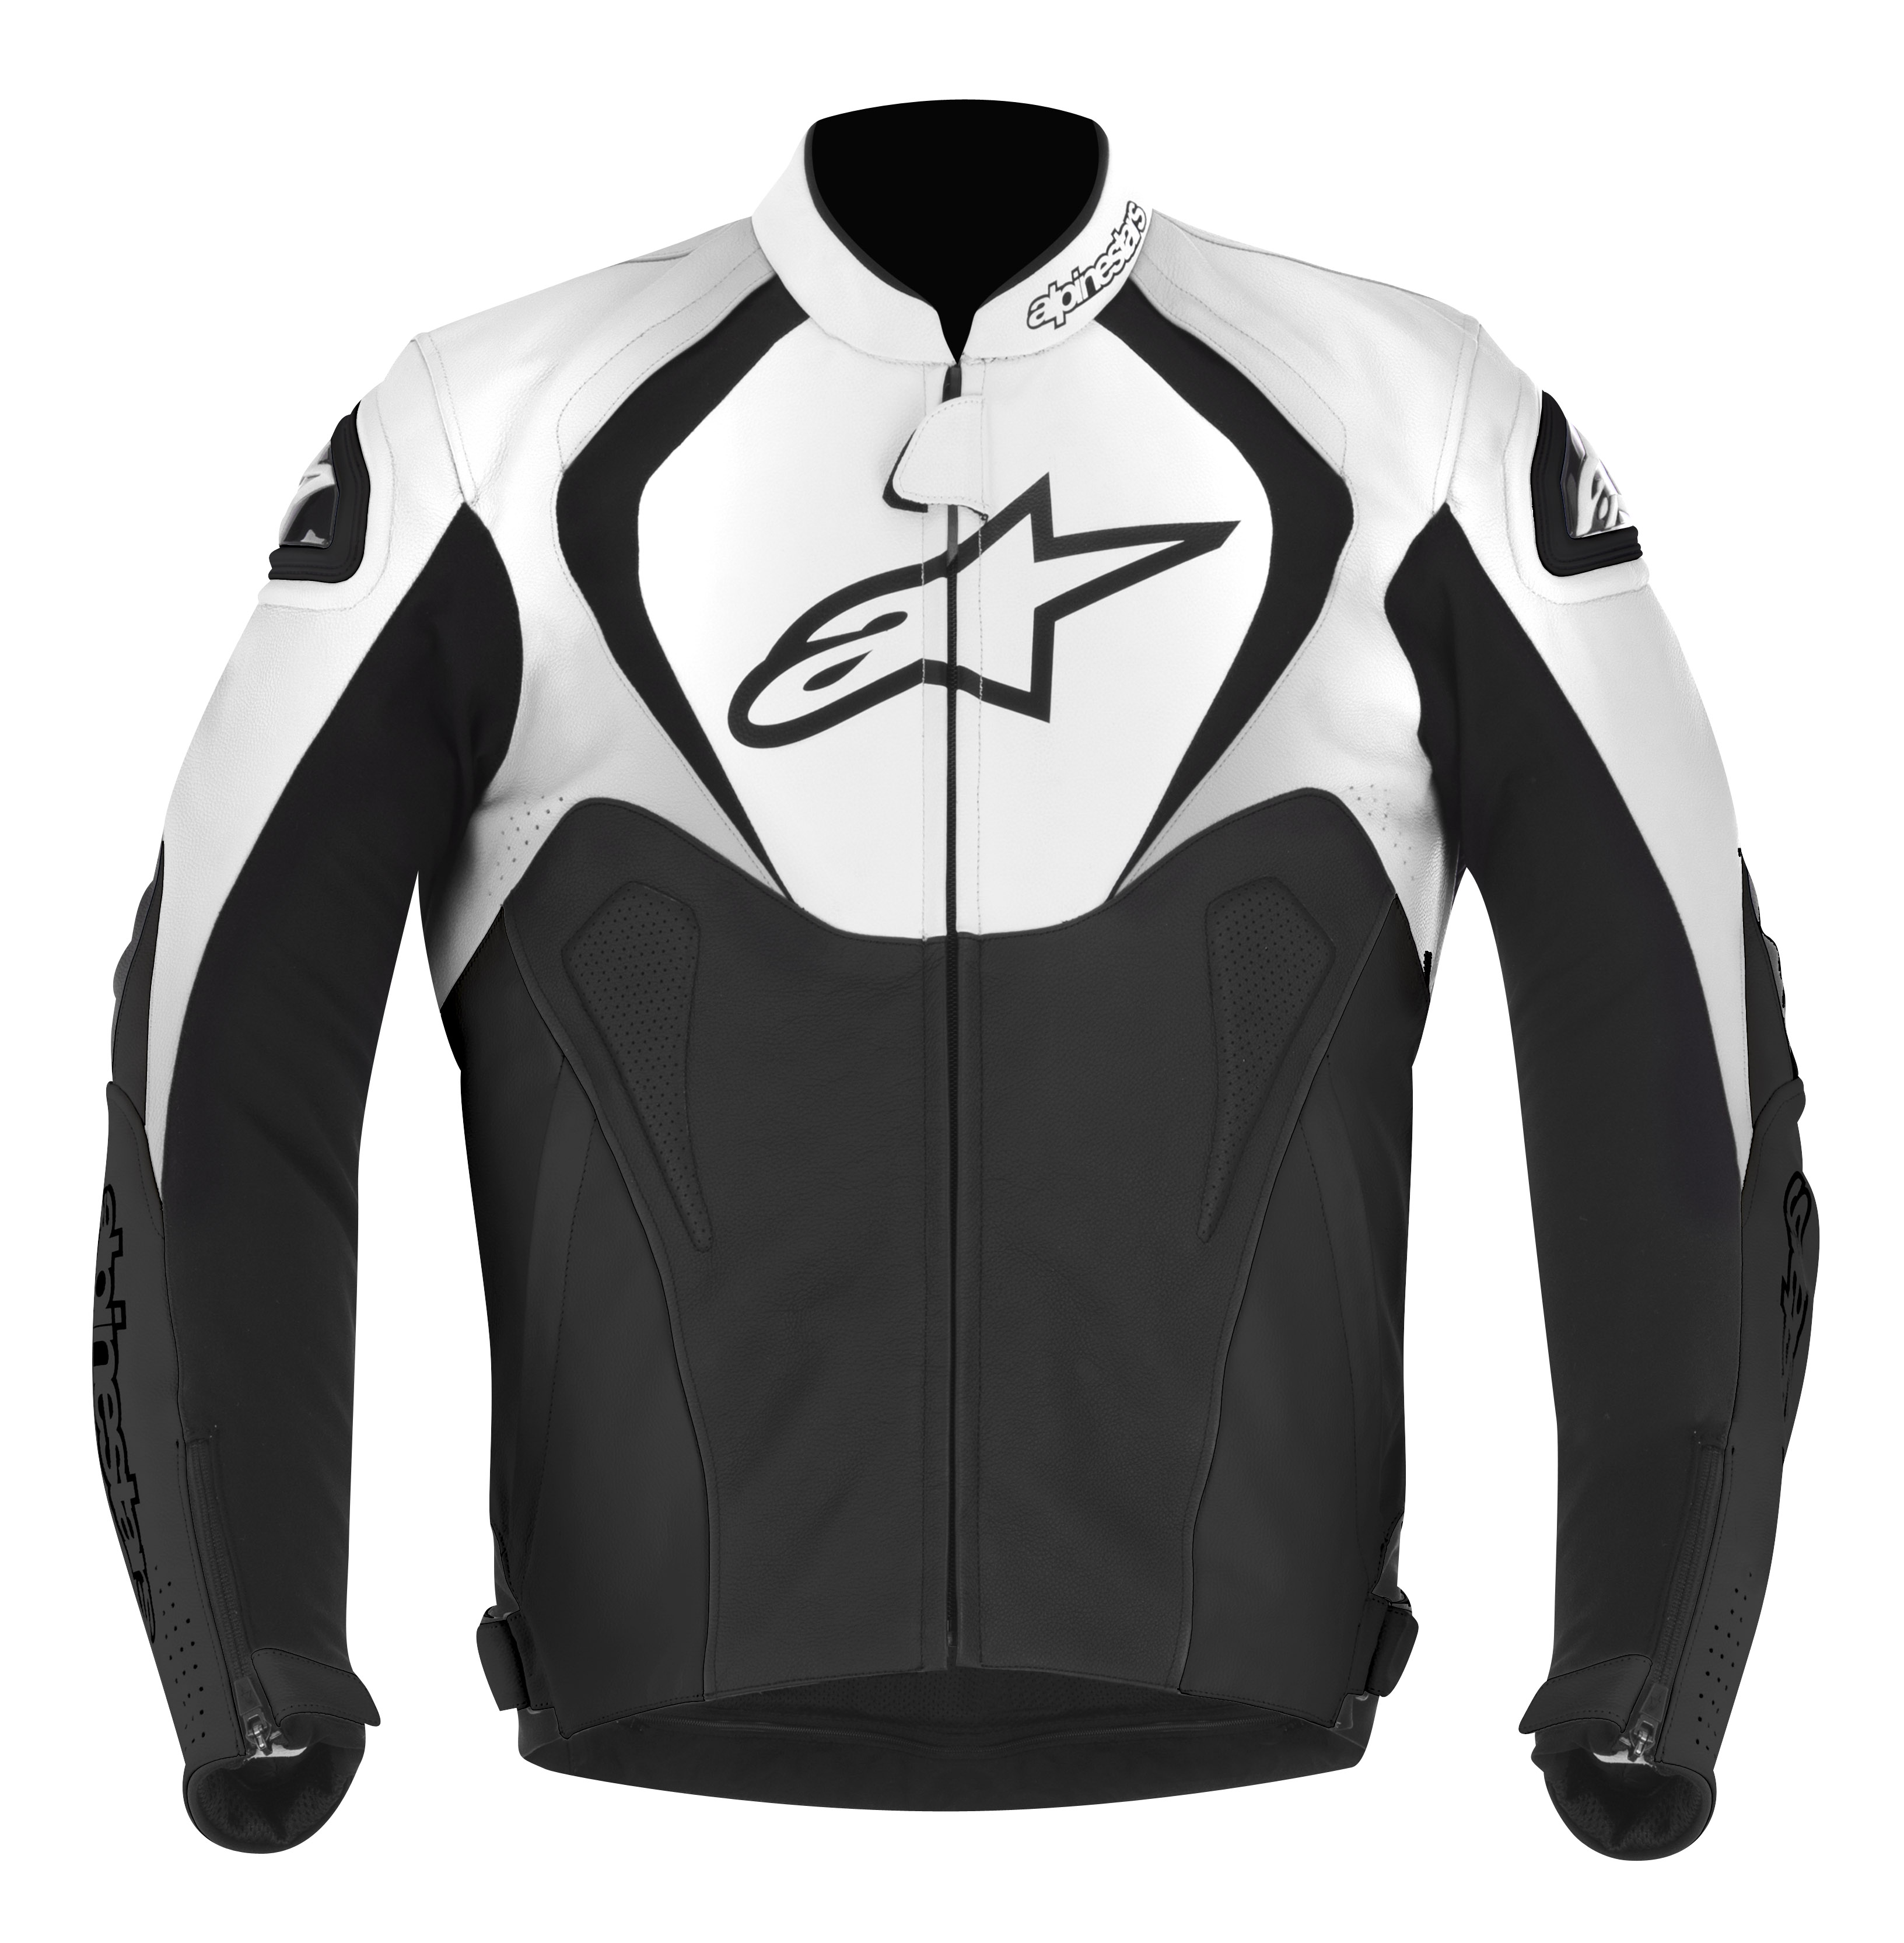 Alpinestars launches 2014 spring collection